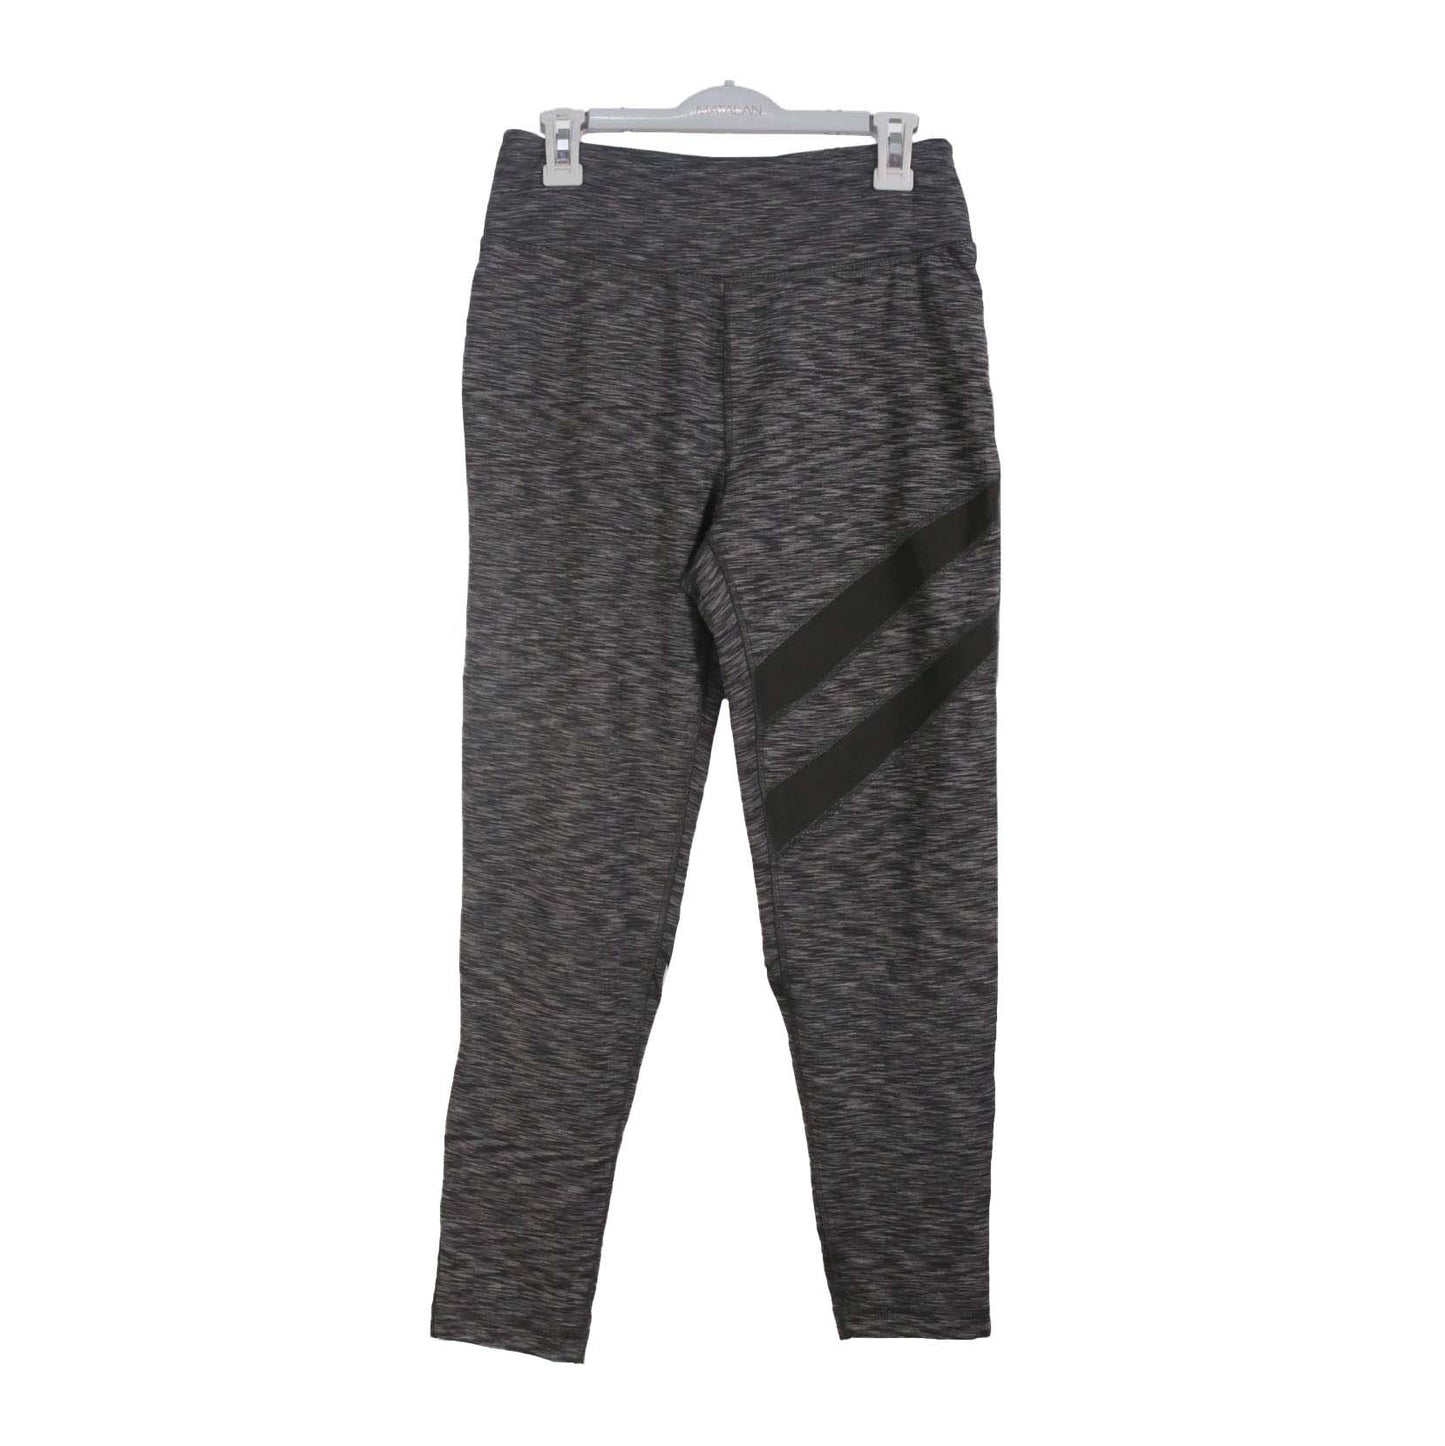 ABS CLASSIC COMFORT TROUSER